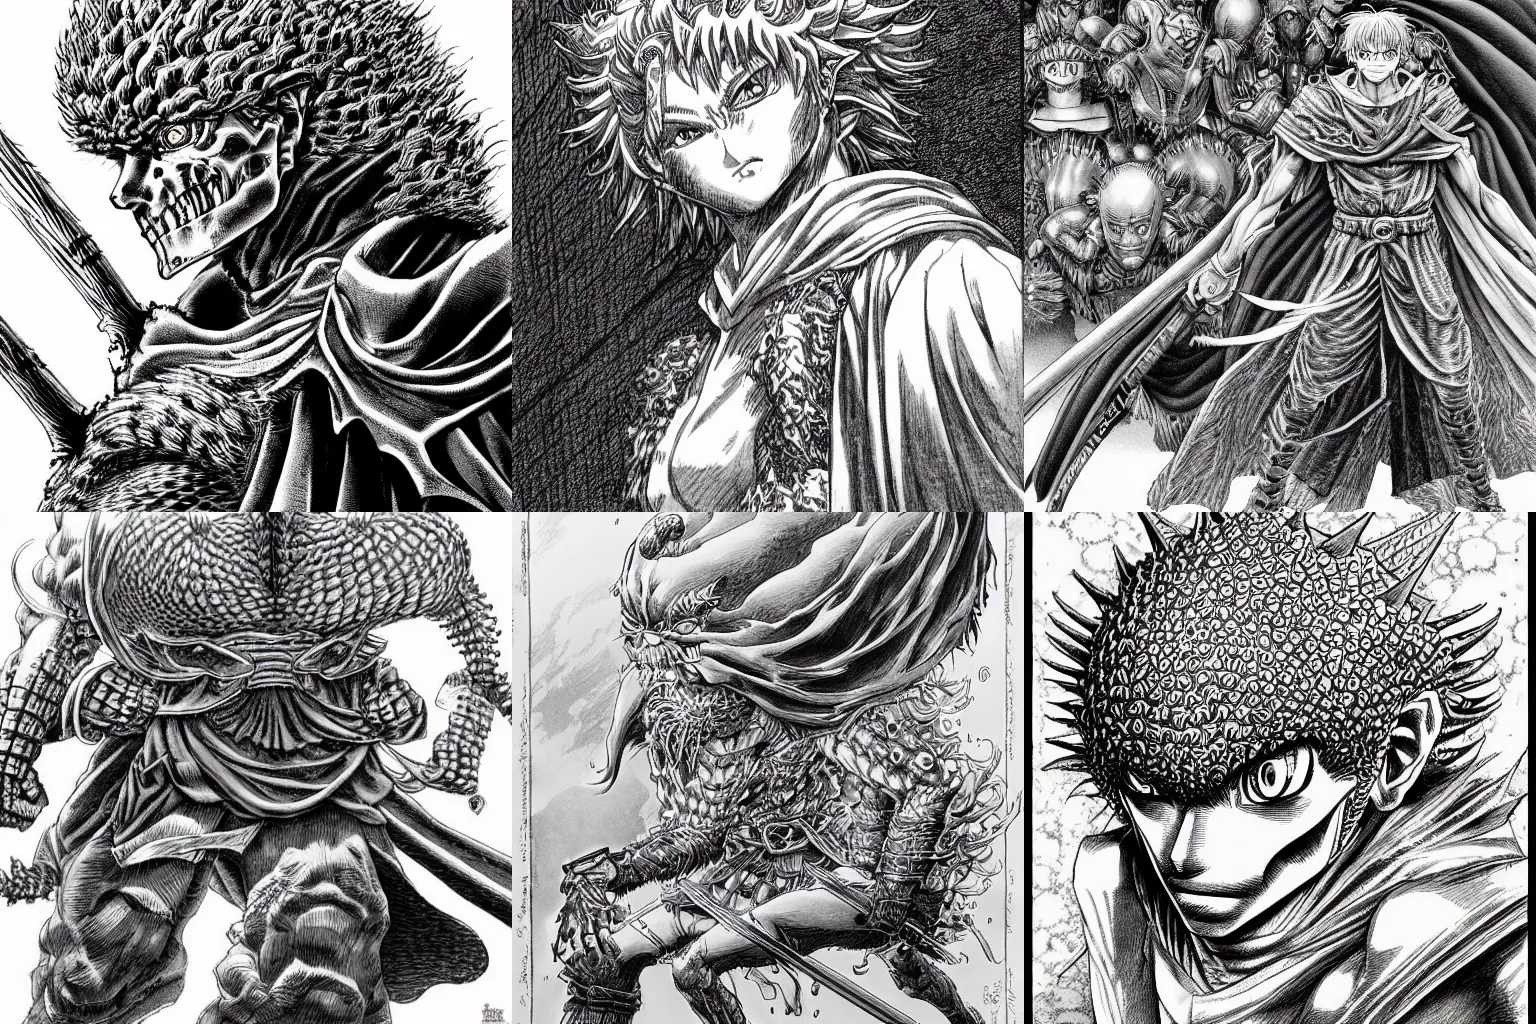 Prompt: character design by kentaro miura, hyper-detailed